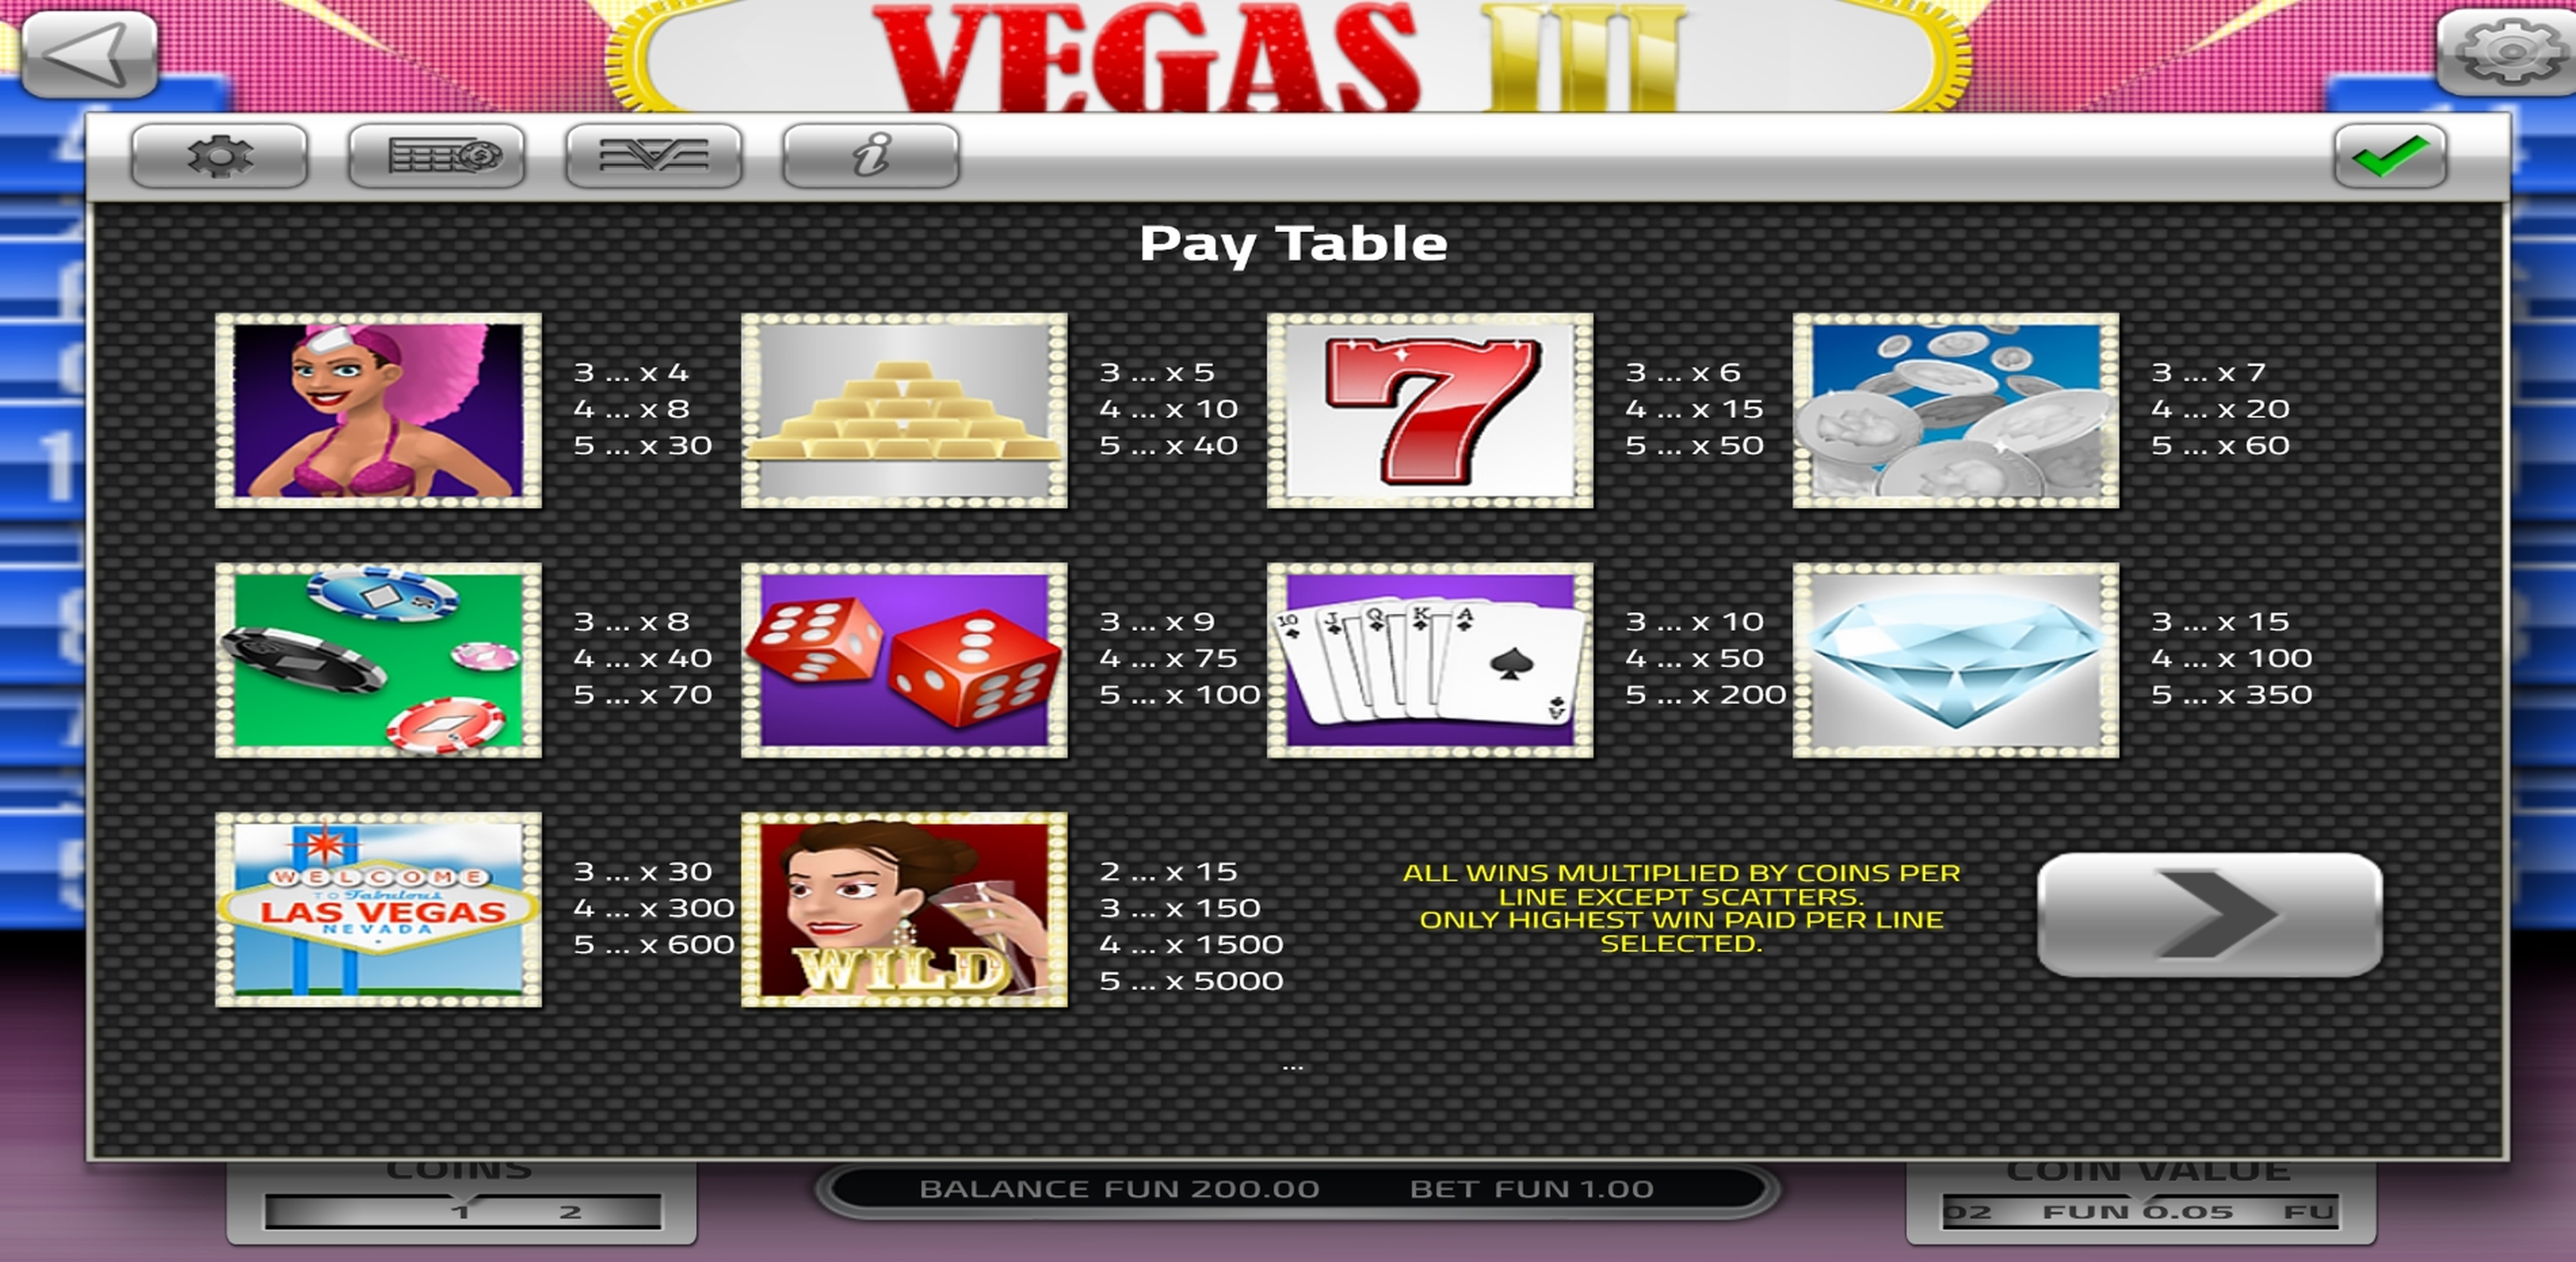 Info of Vegas III Slot Game by Concept Gaming